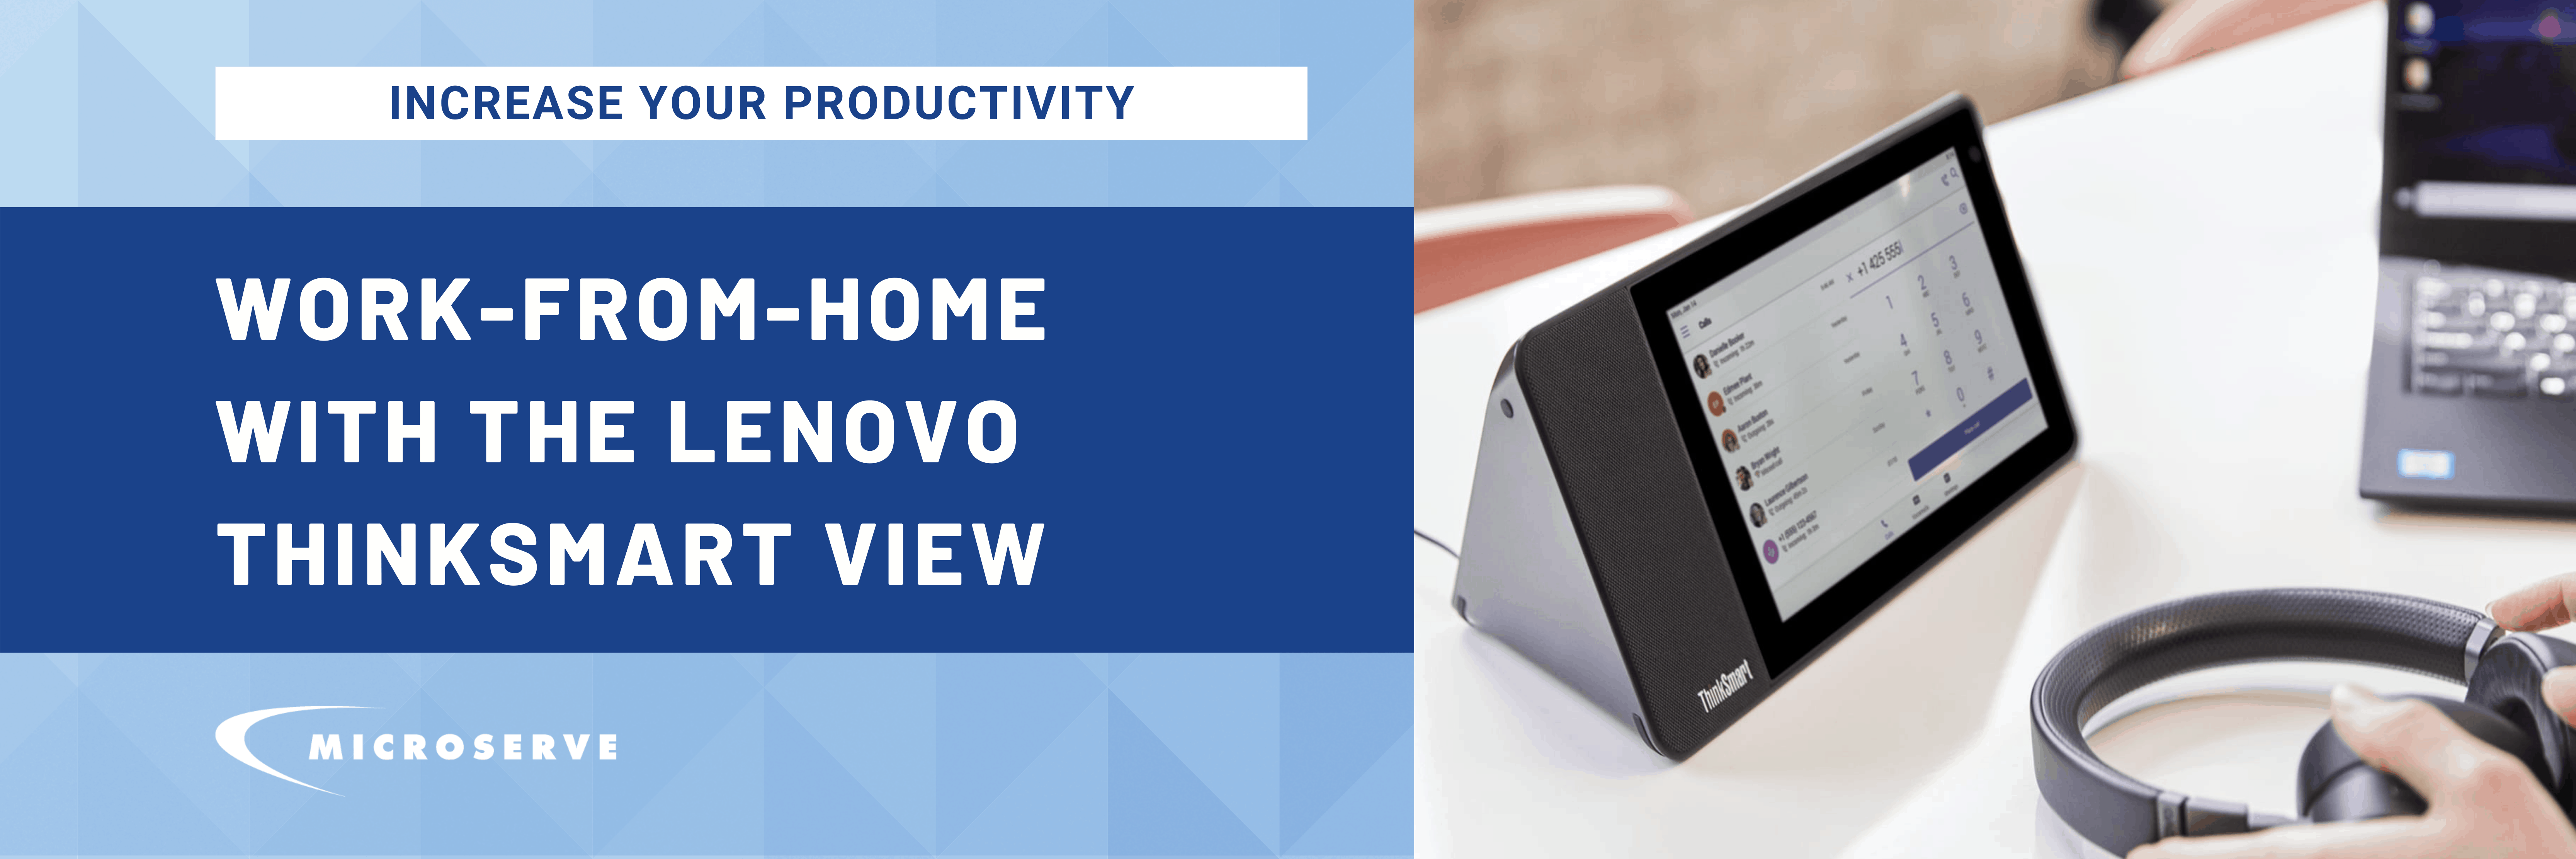 Work-From-Home with the Lenovo ThinkSmart View